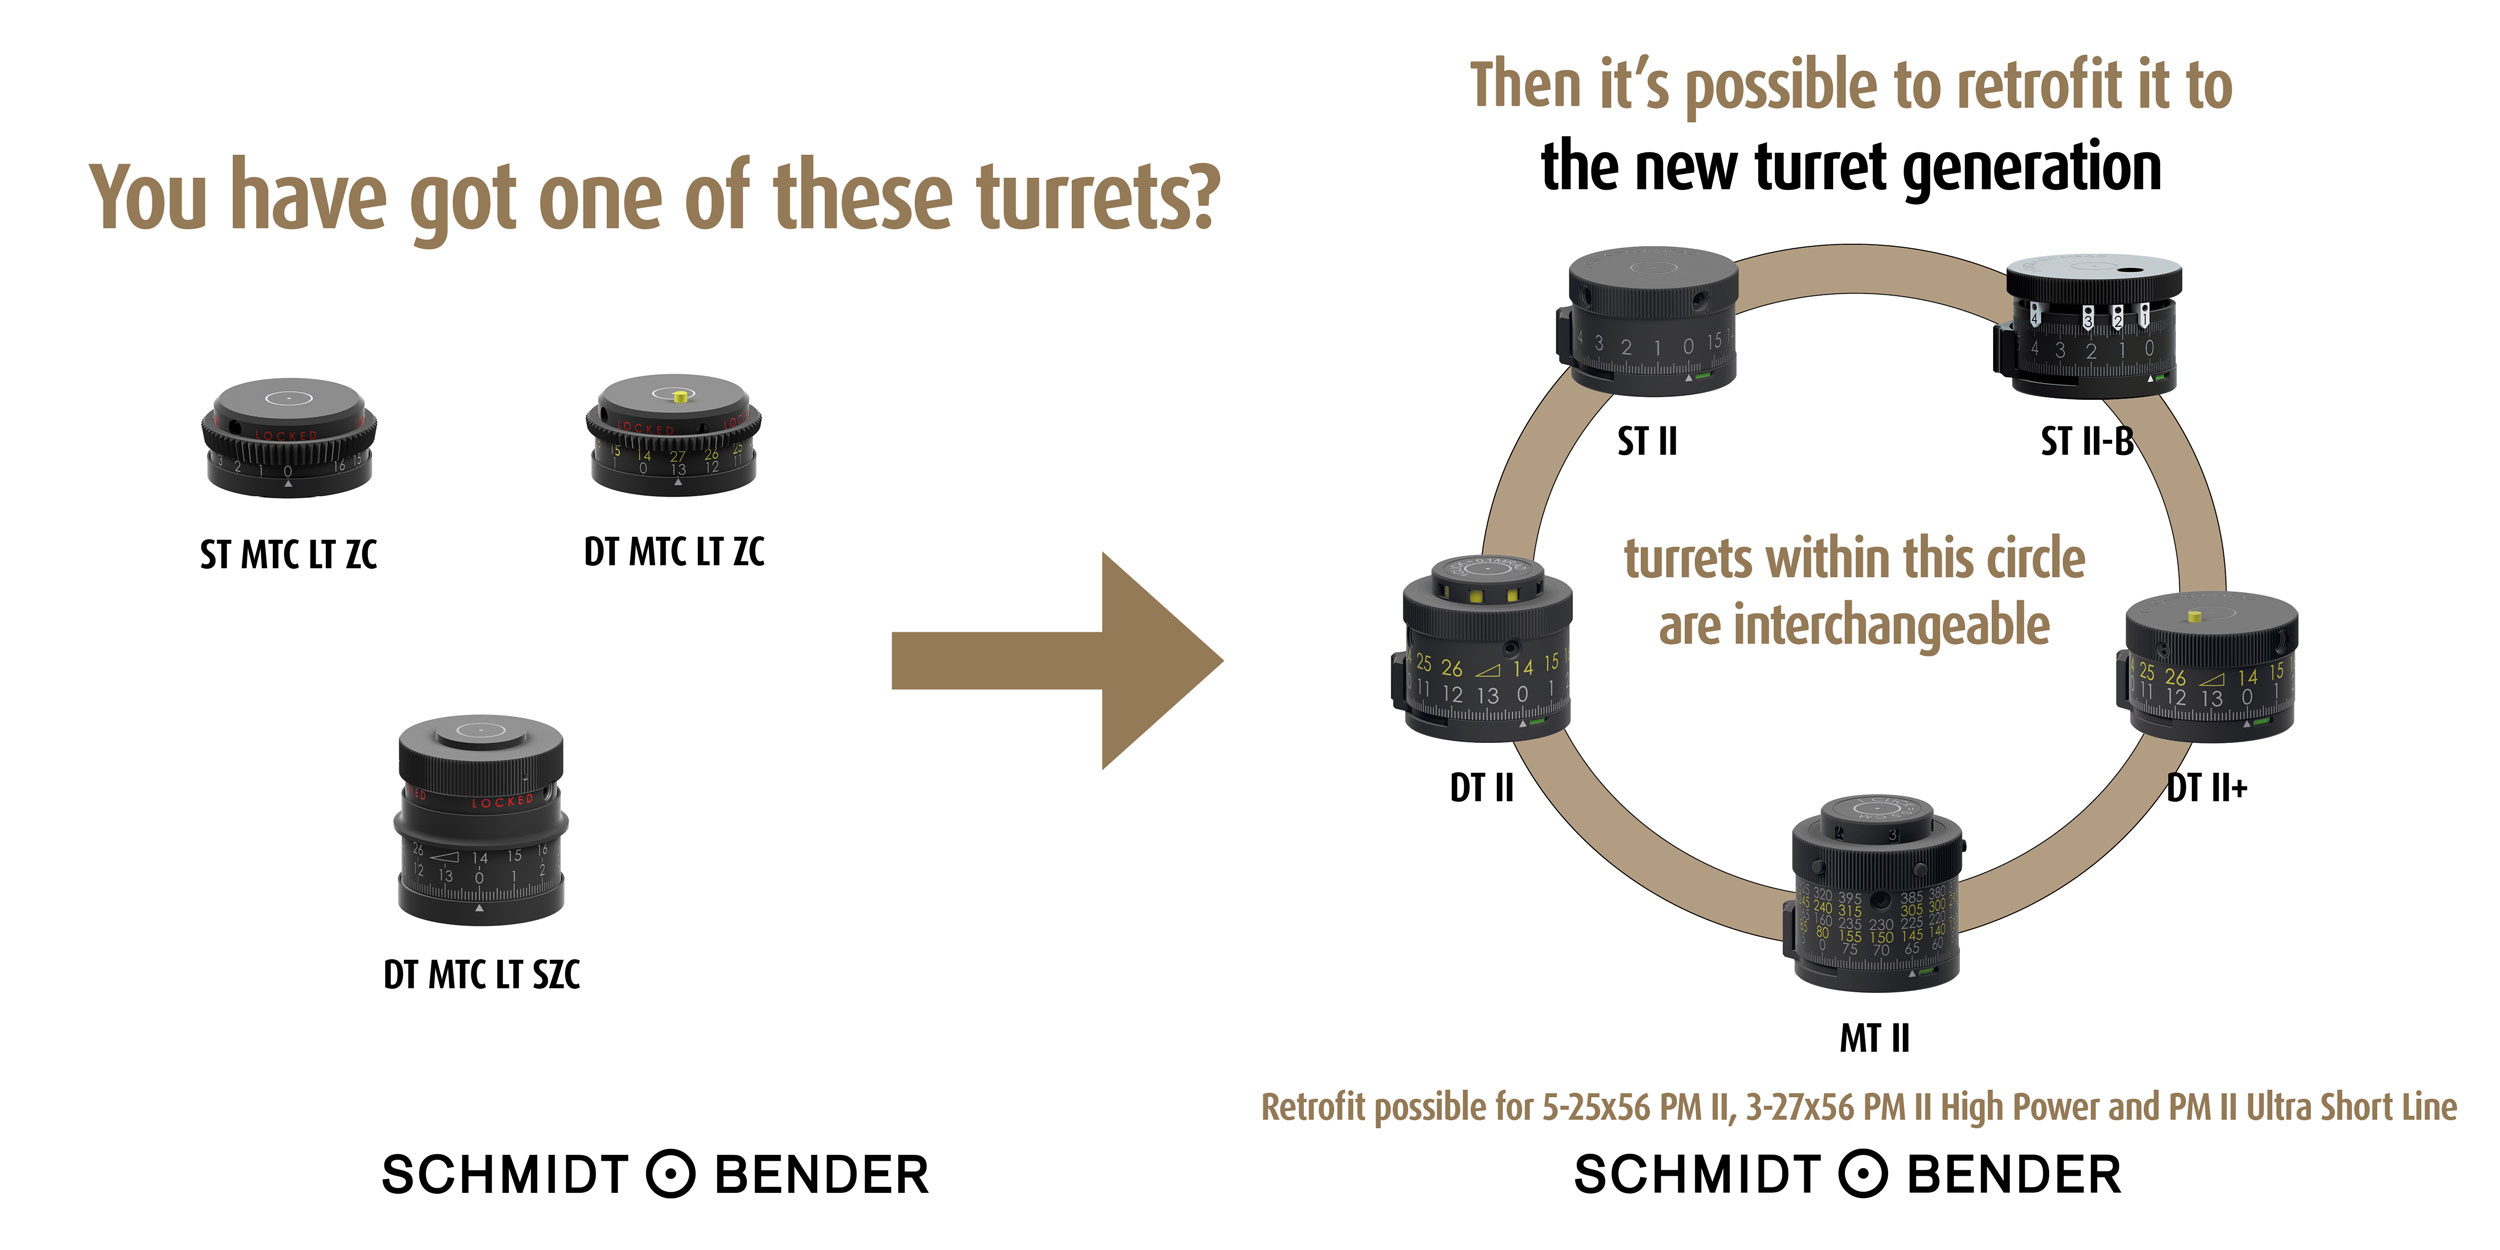 Overview graphic of which turrets can be converted with which of the new generation of turrets